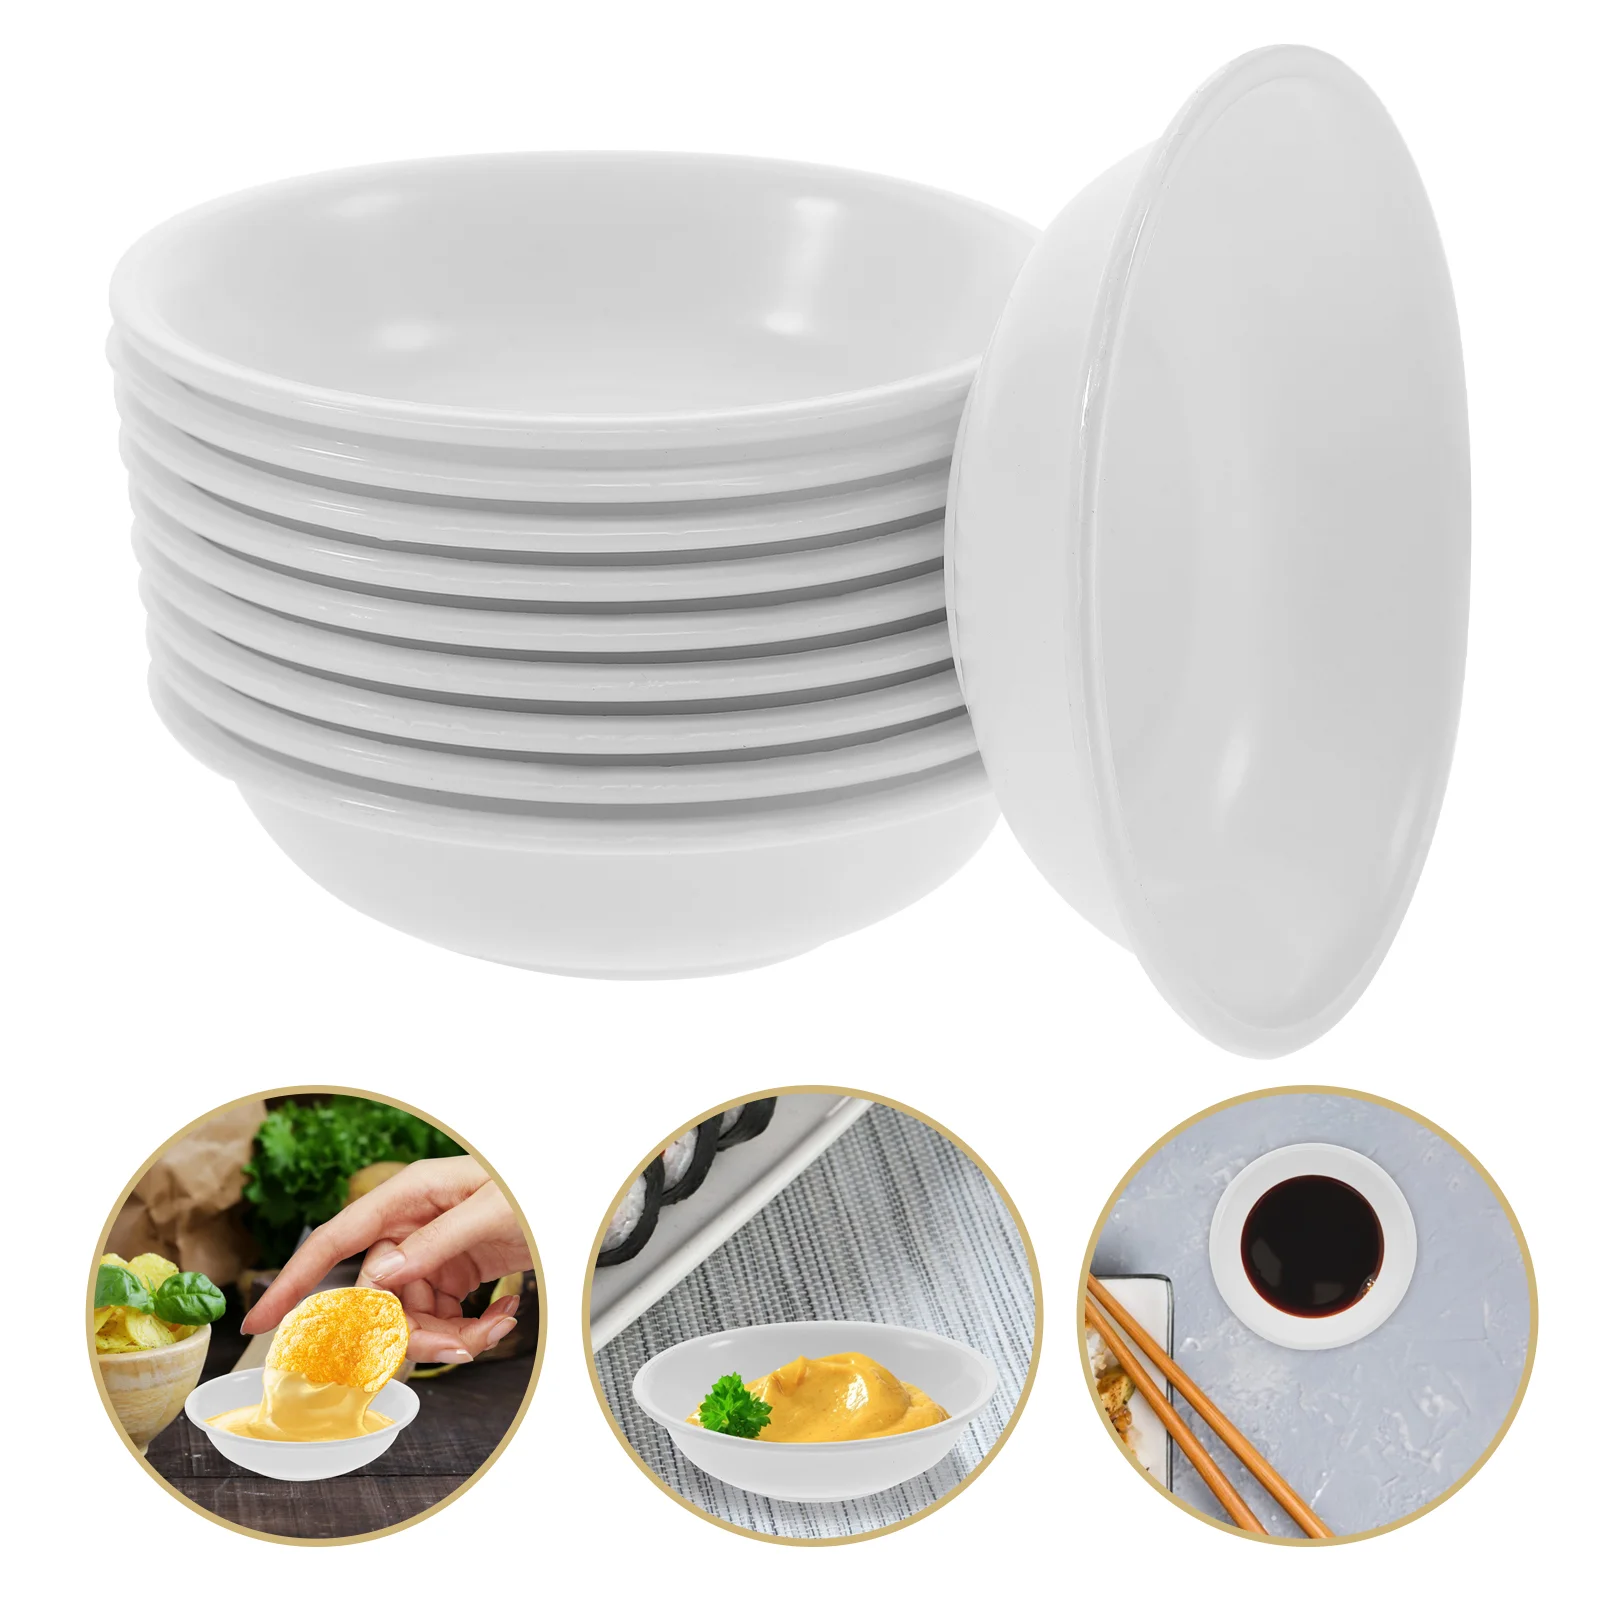 

Sauce Dipping Dish Dishes Bowls Plate Bowl Seasoning Condiment Soy Plates Appetizer Tray Serving Cups Side Sushi Mini Snack Dip